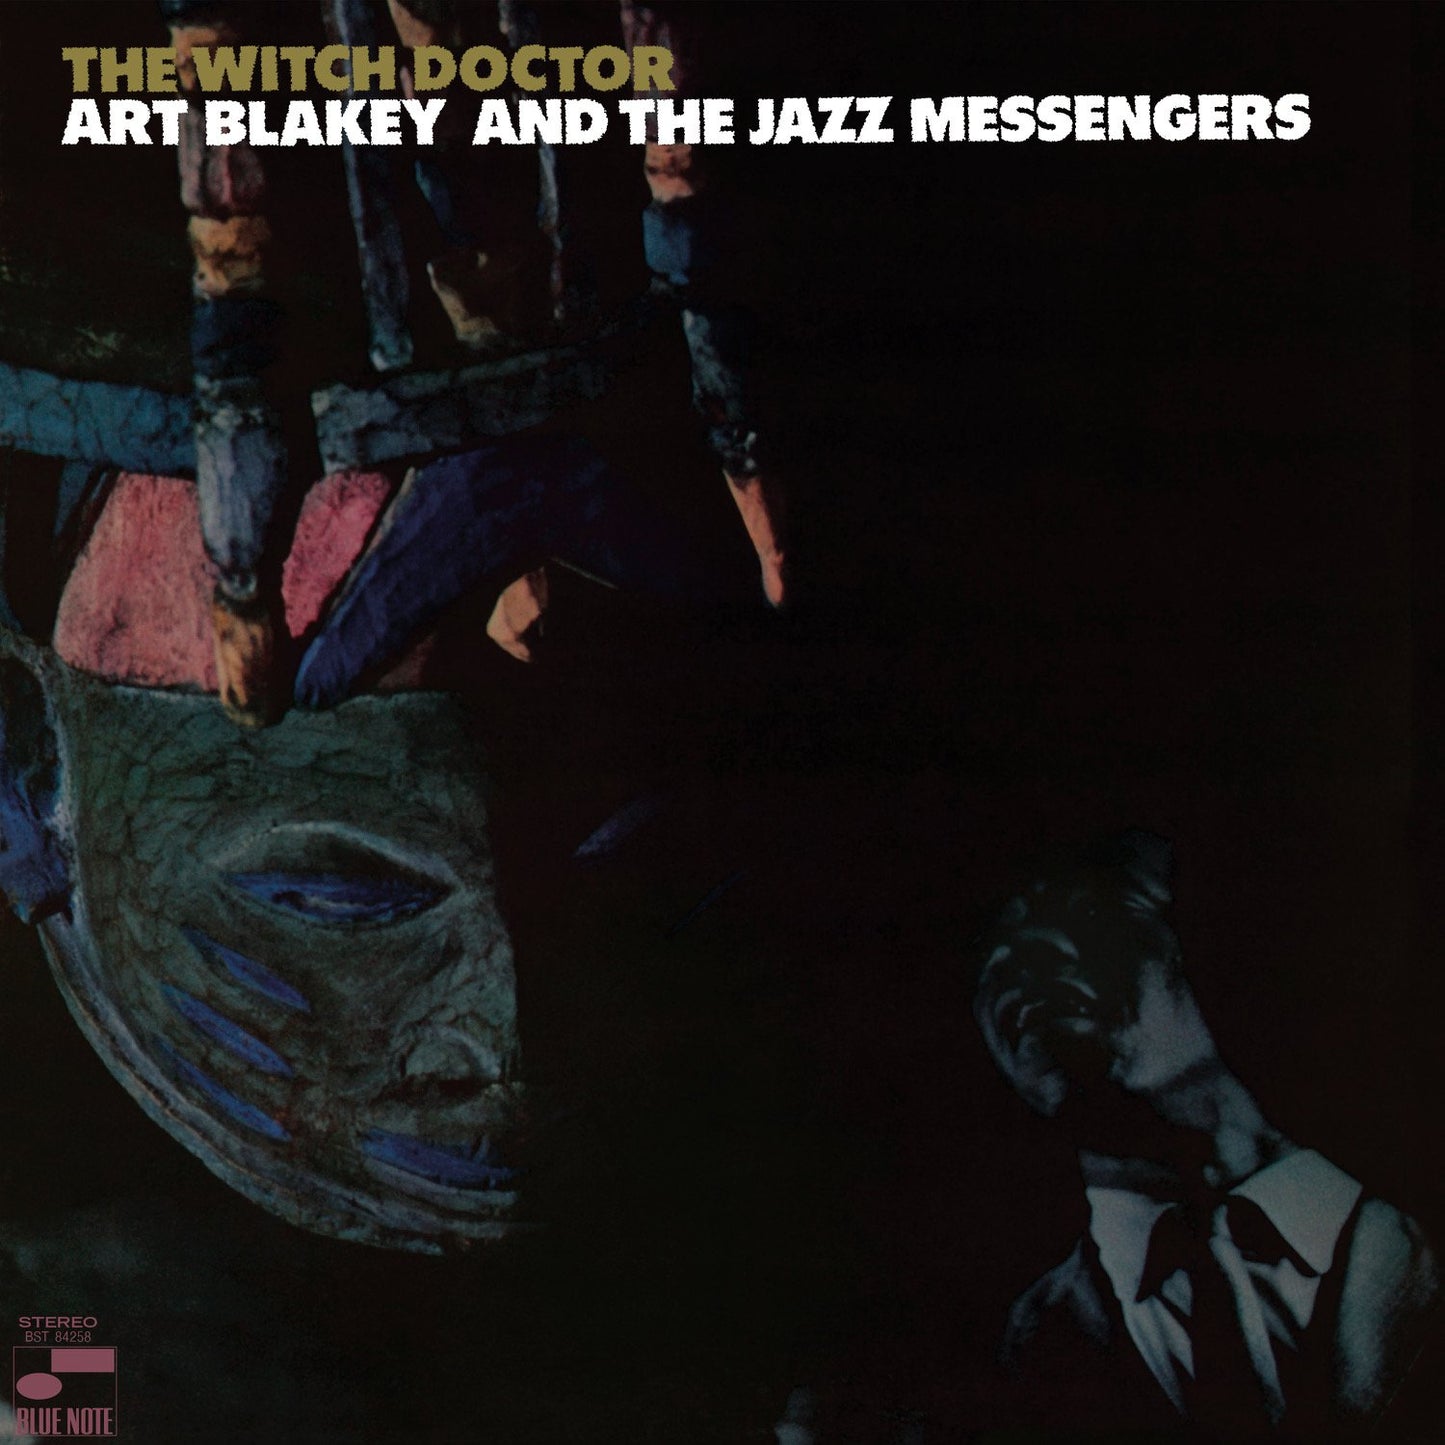 Art Blakey & The Jazz Messengers - The Witch Doctor (Blue Note Tone Poet Series) LP